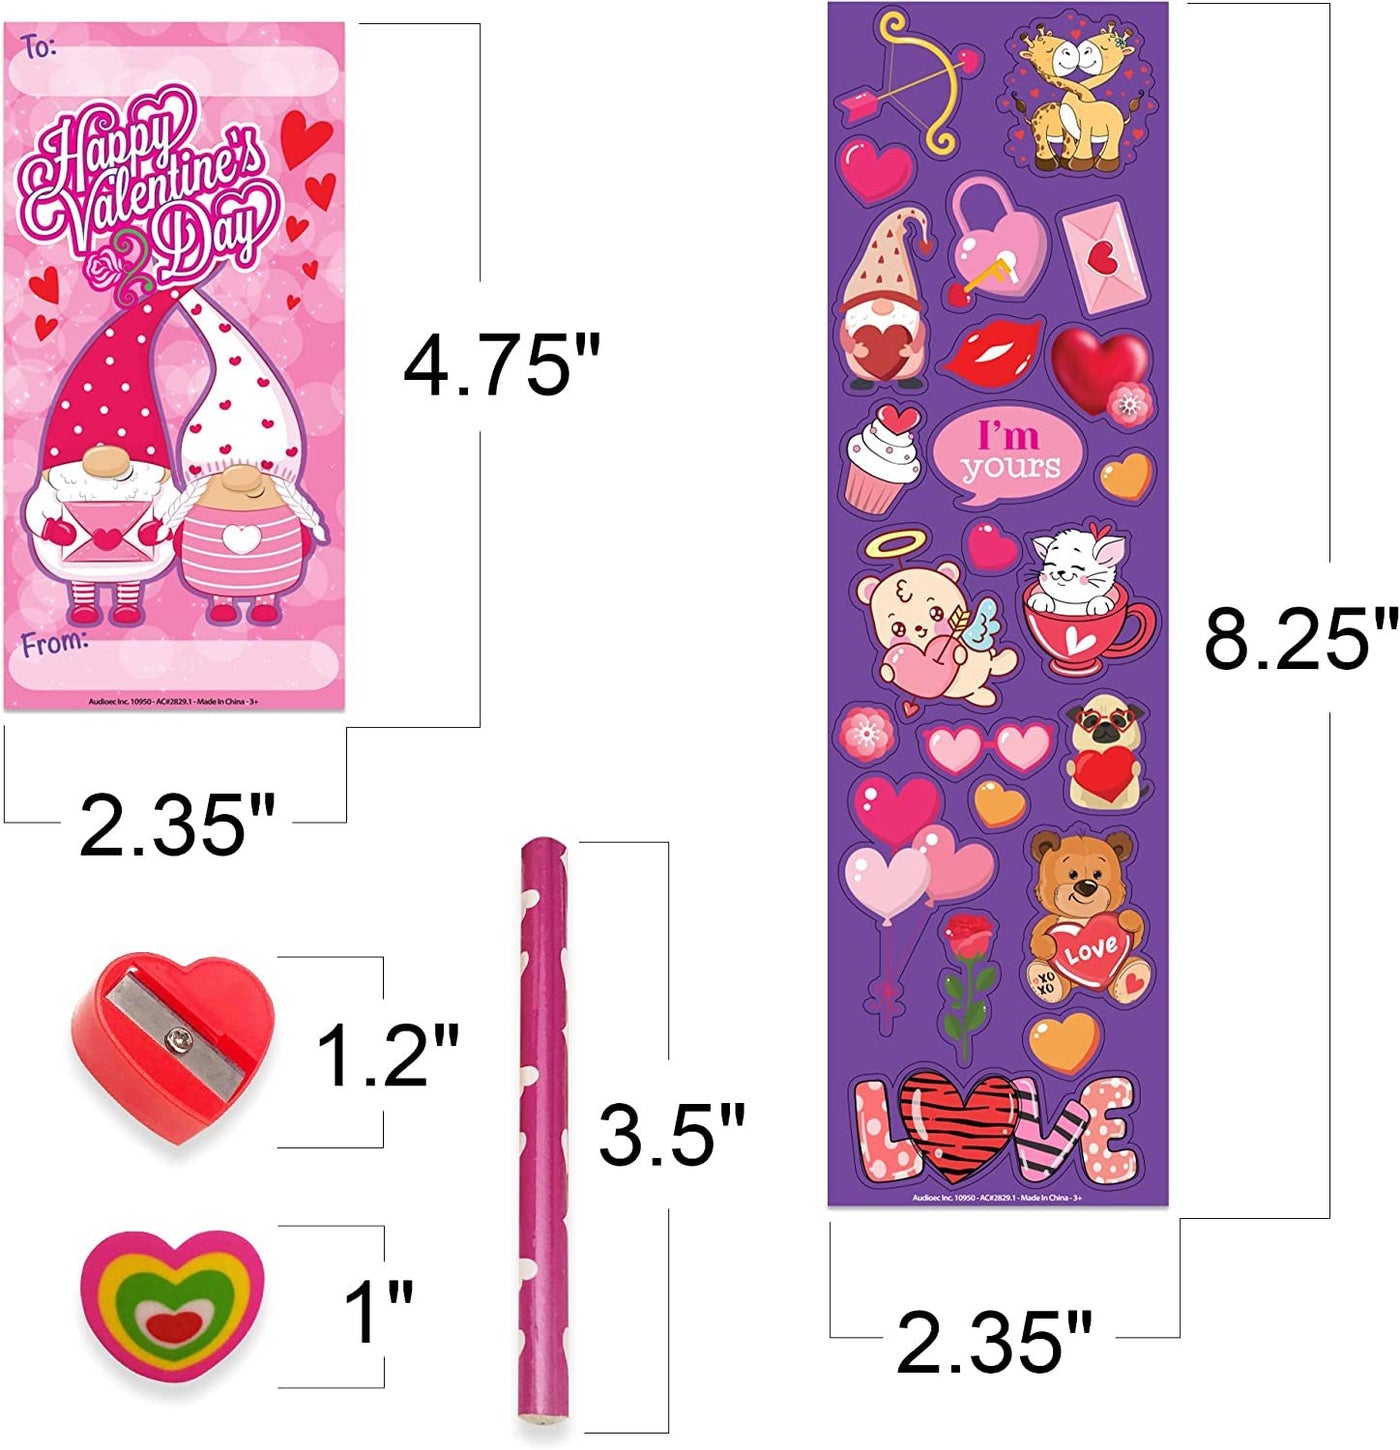 Valentines Day Stationery Set, Stickers, Greeting Cards & Supplies, 36 Pack